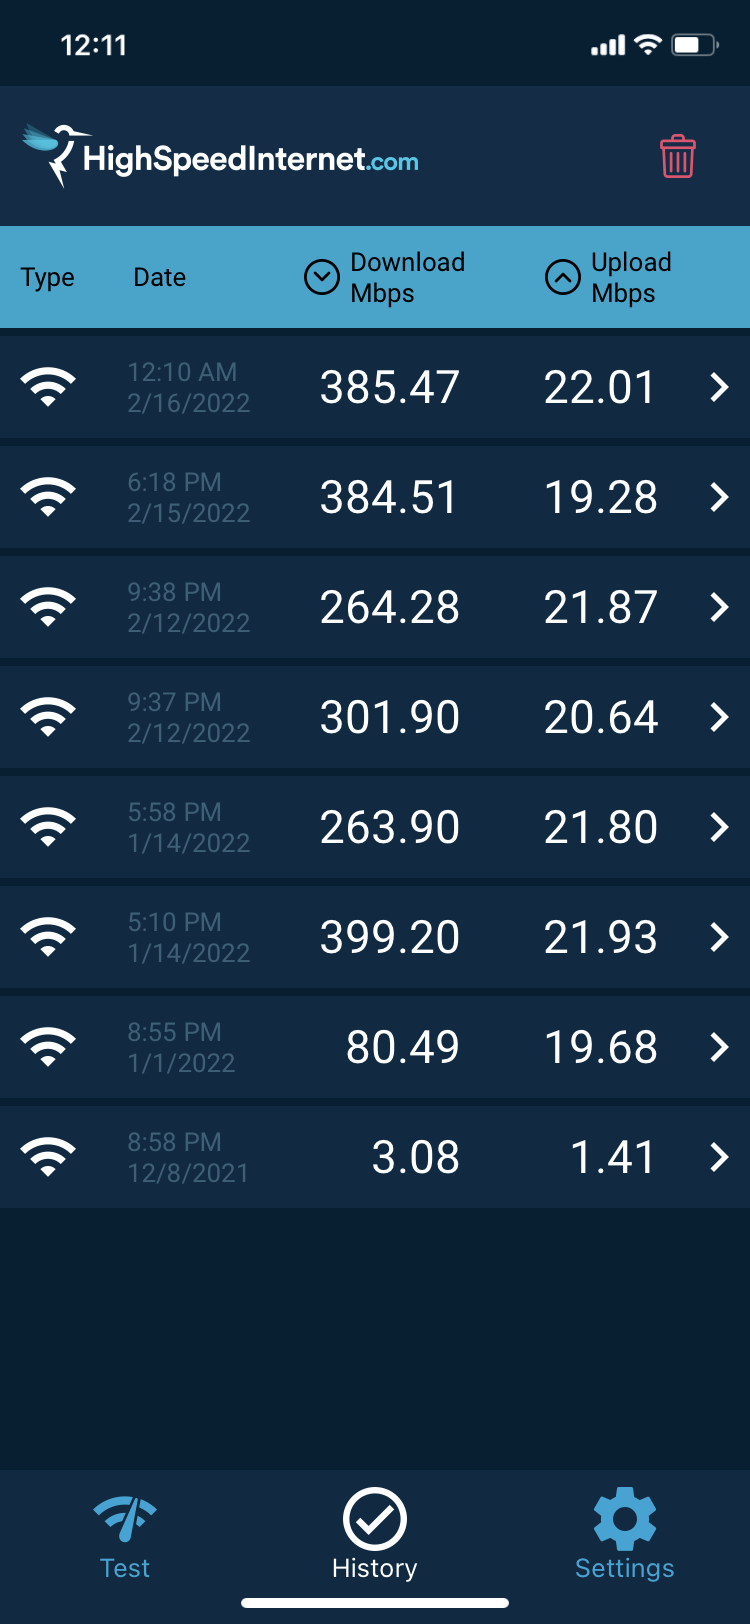 Speed test results comparing Netgear and Xfinity xFi